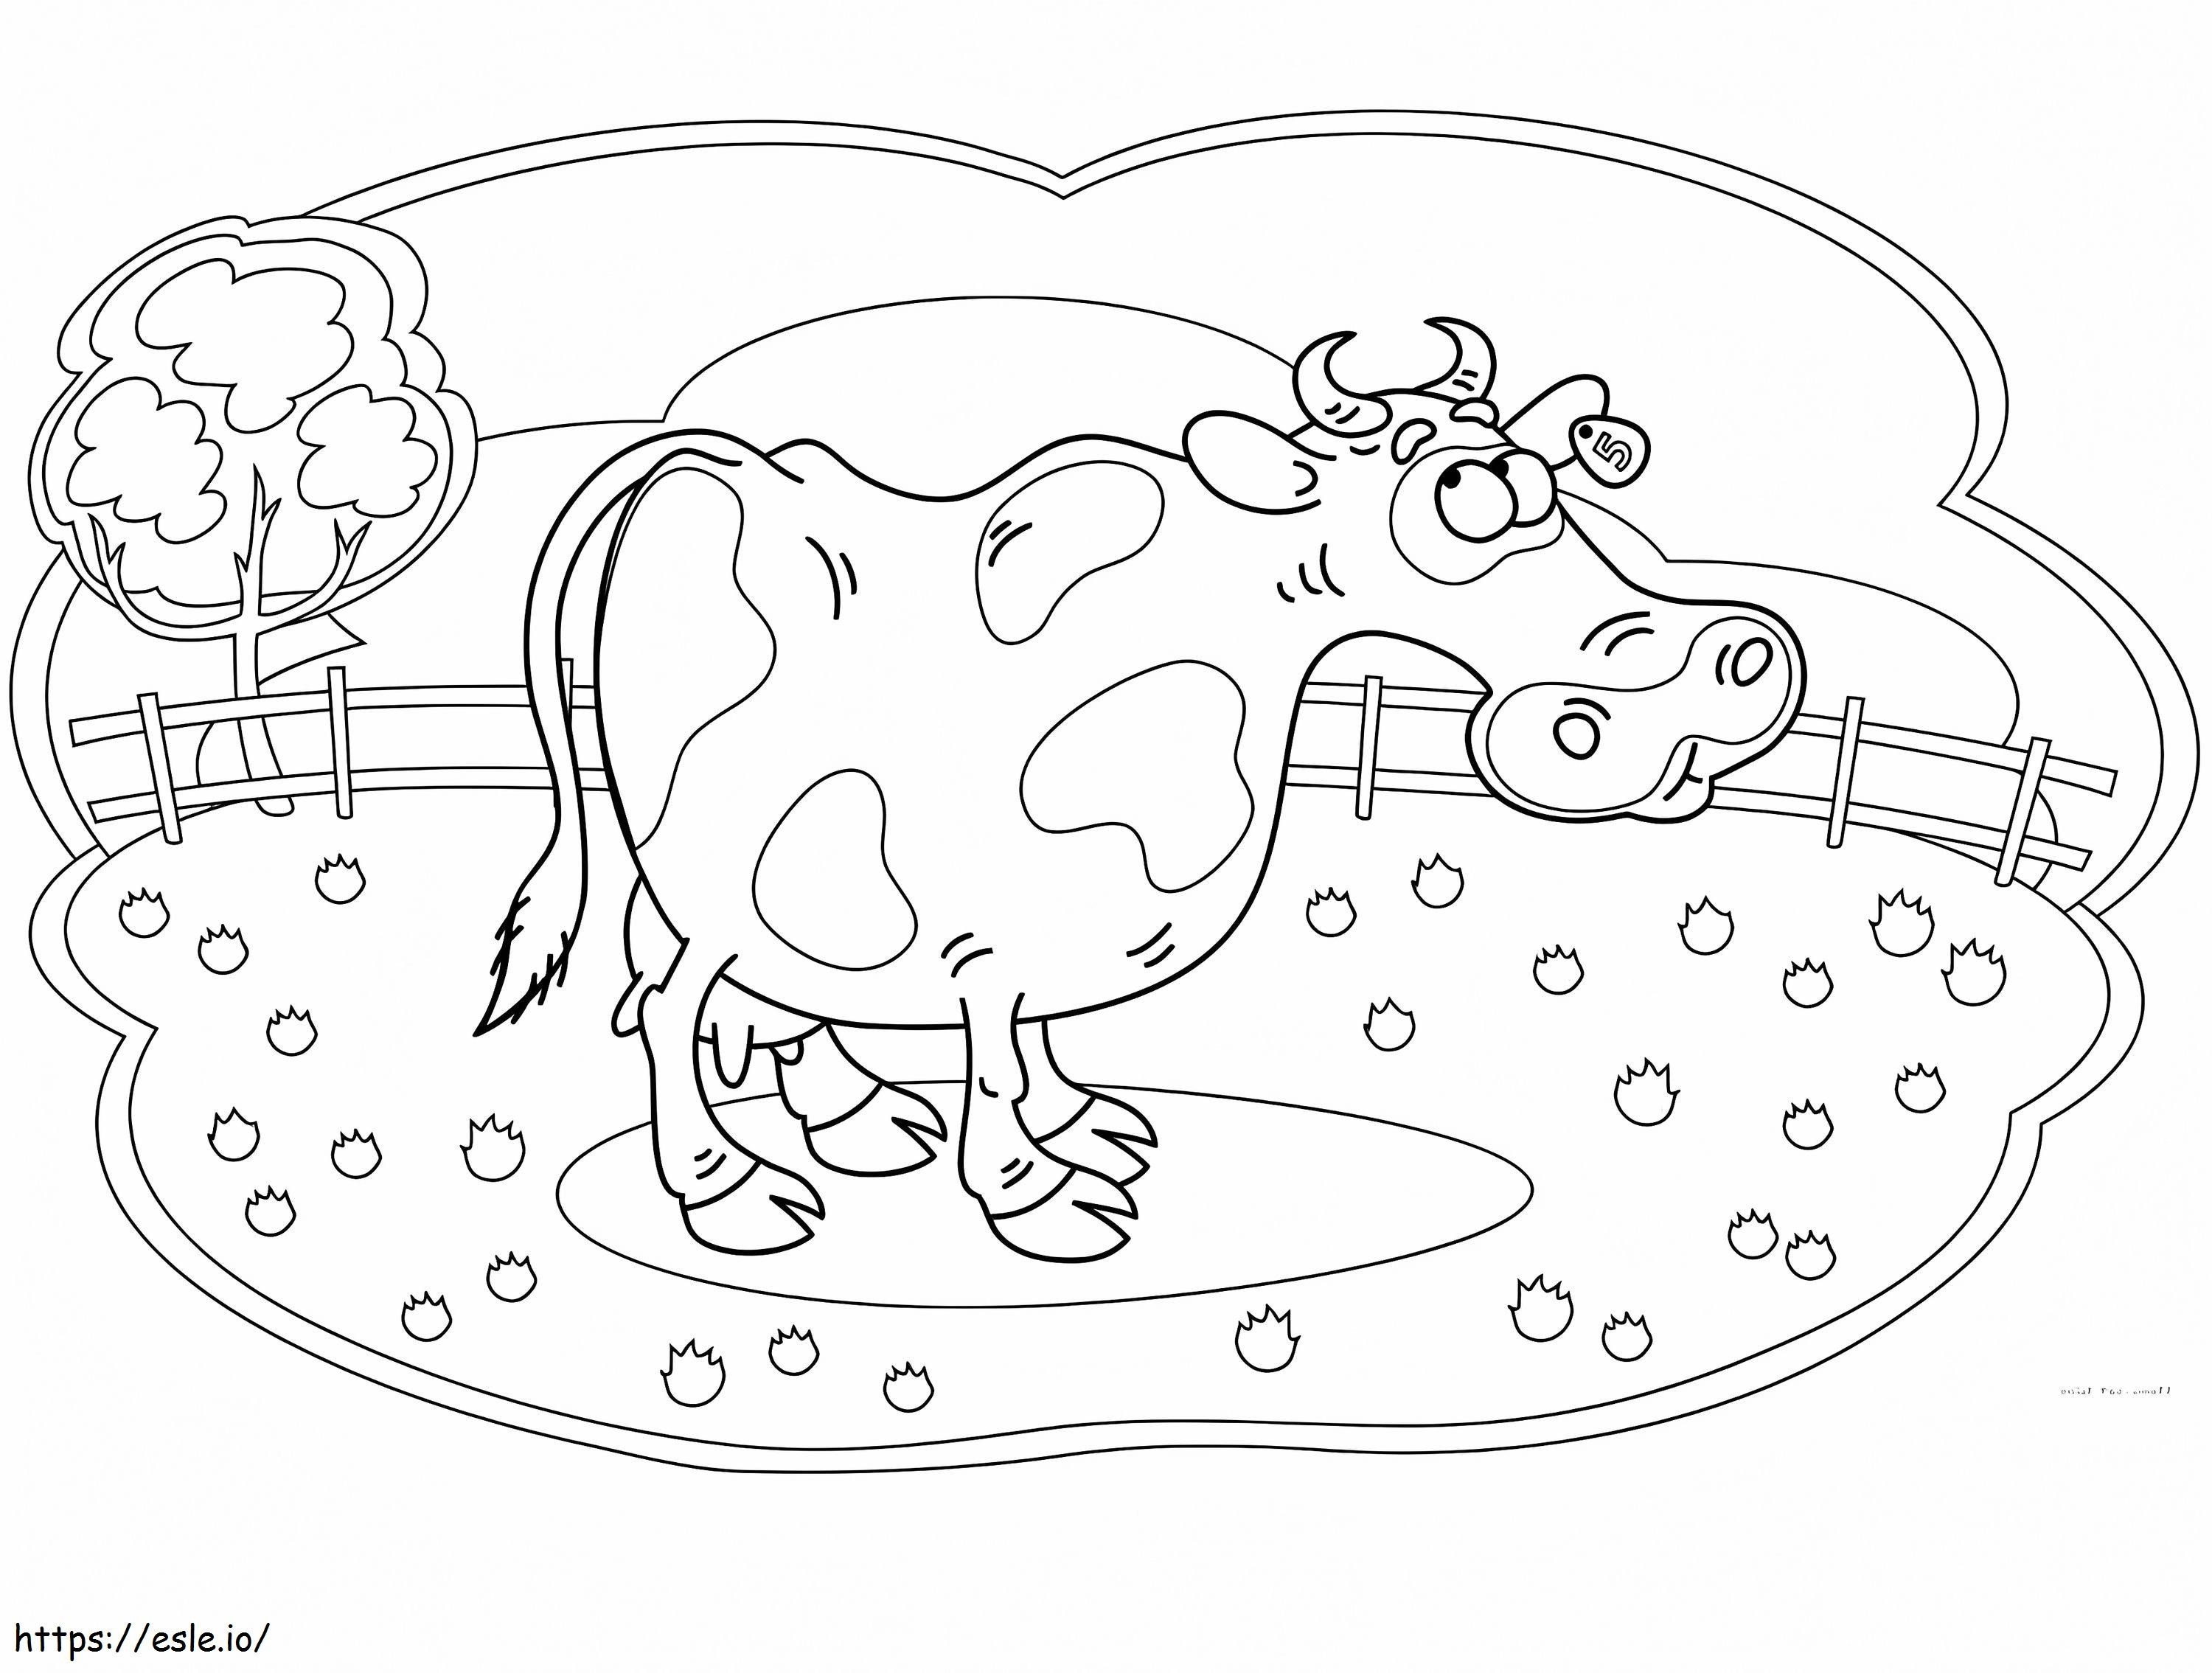 Cow Looks Funny coloring page